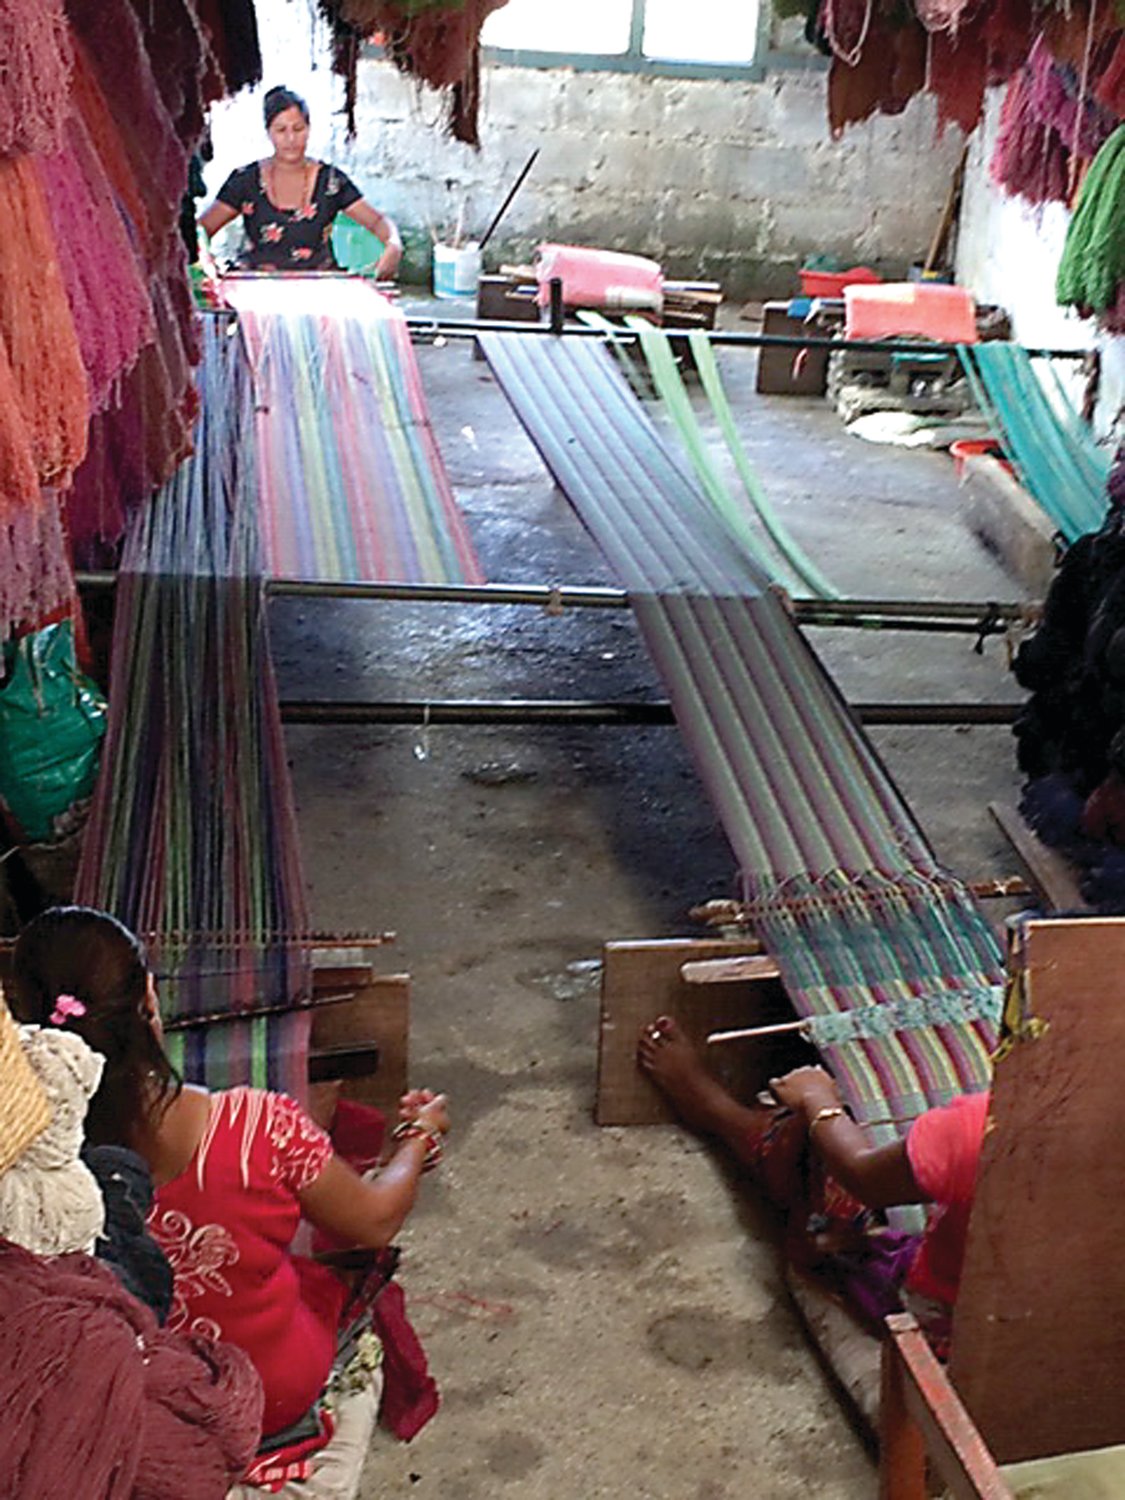 Nepali women work on a loom in one of the women’s training centers established with the help of Maria Santangelo, Pine Run Retirement Community’s executive director. She has formed the Ama Chhori Foundation of Hope to further help Nepali women and girls. Photograph by Maria Santangelo .